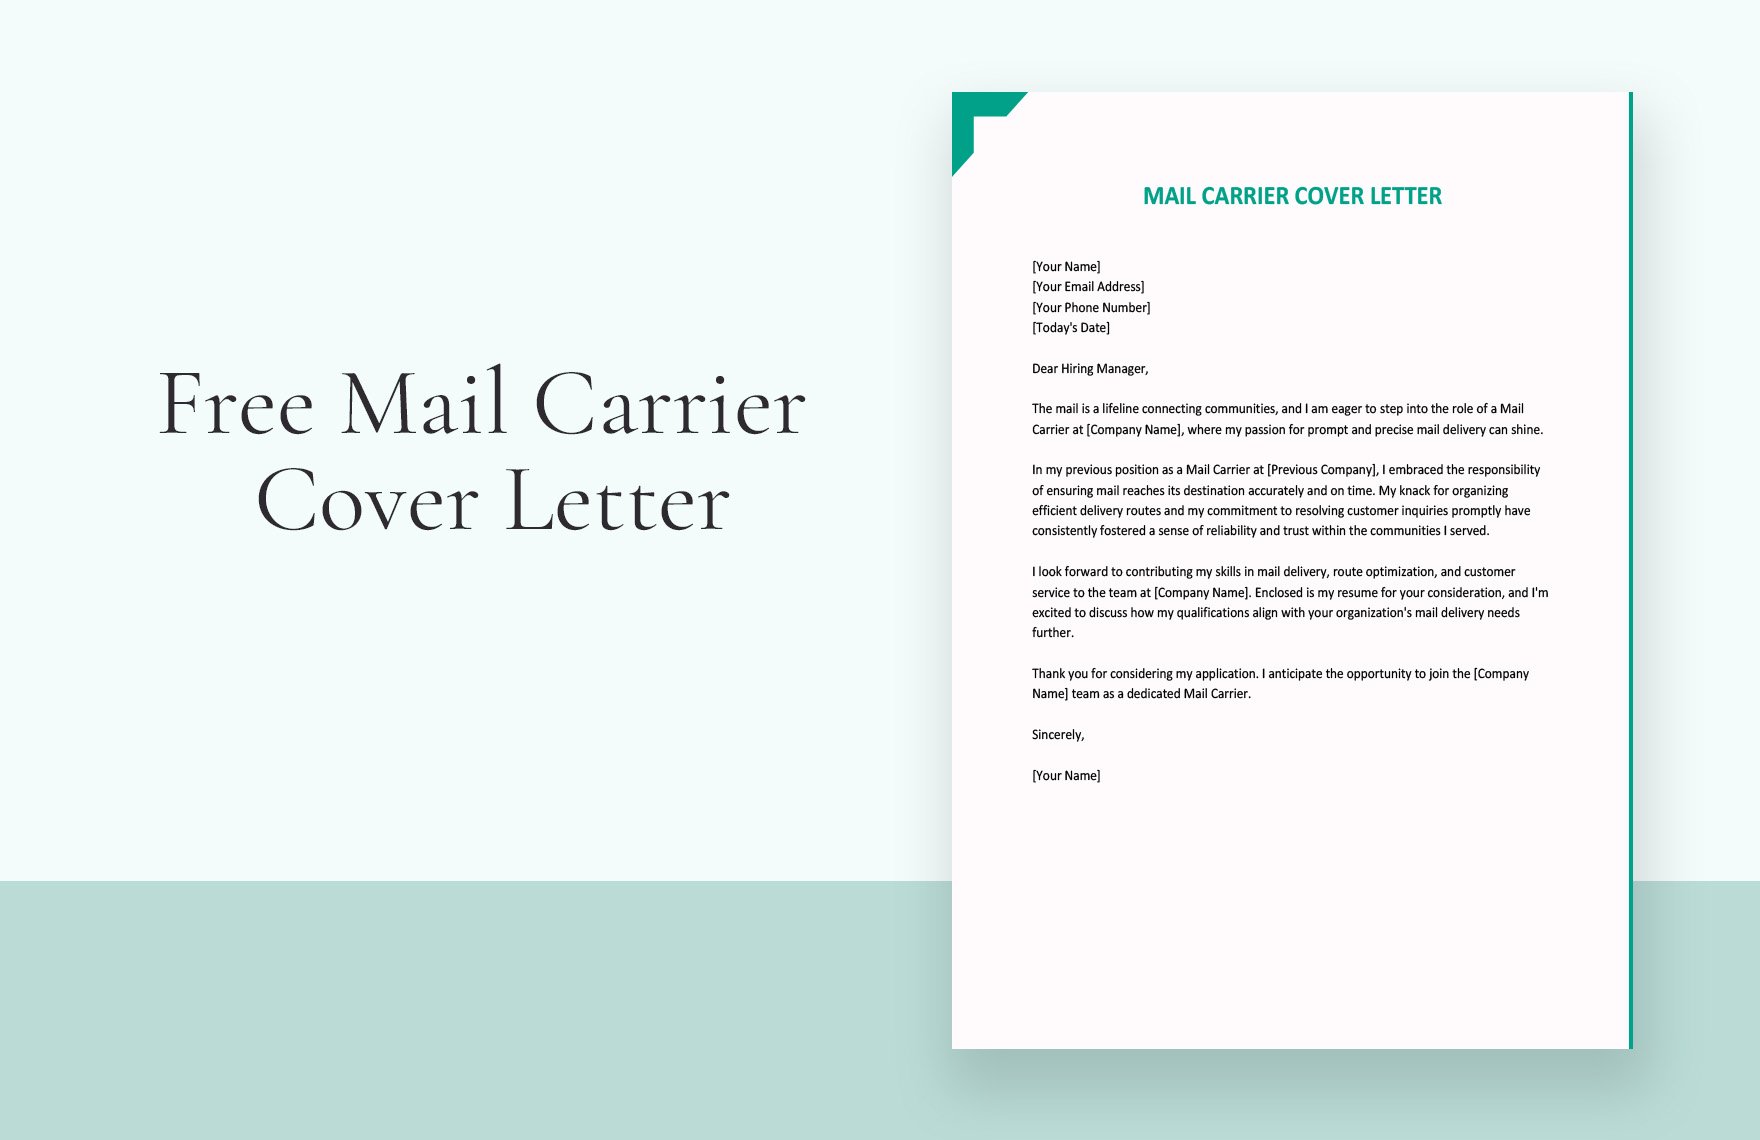 Mail Carrier Cover Letter